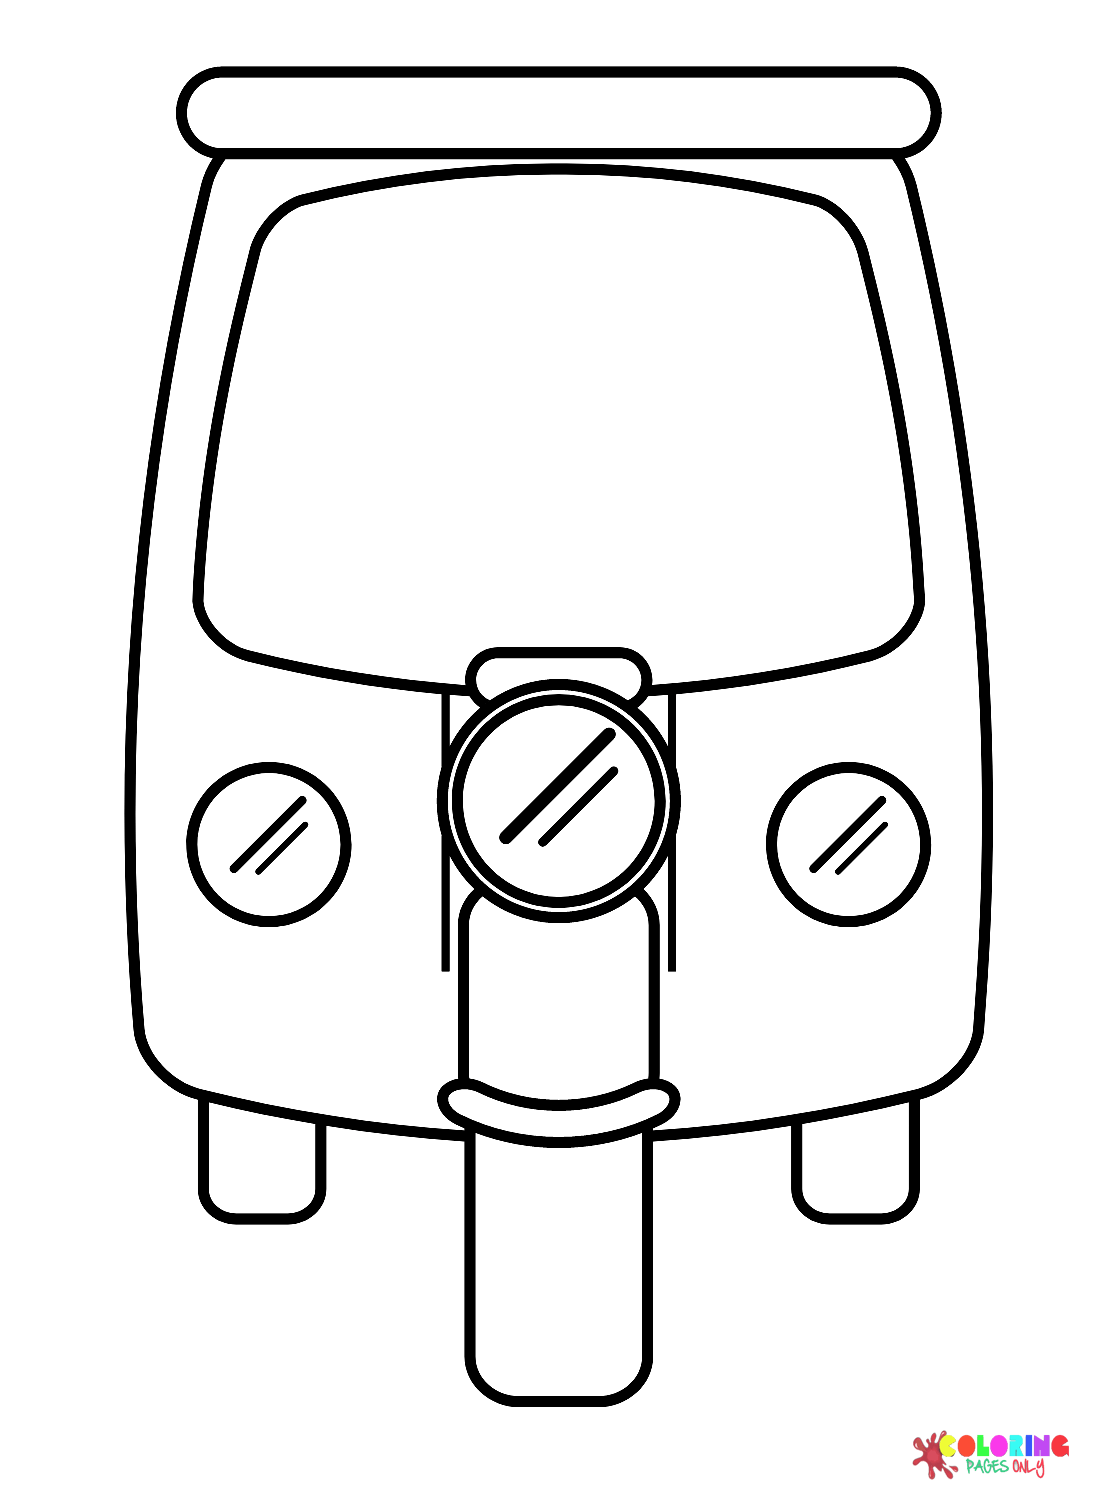 Motor Rickshaw Tricycle Coloring Pages